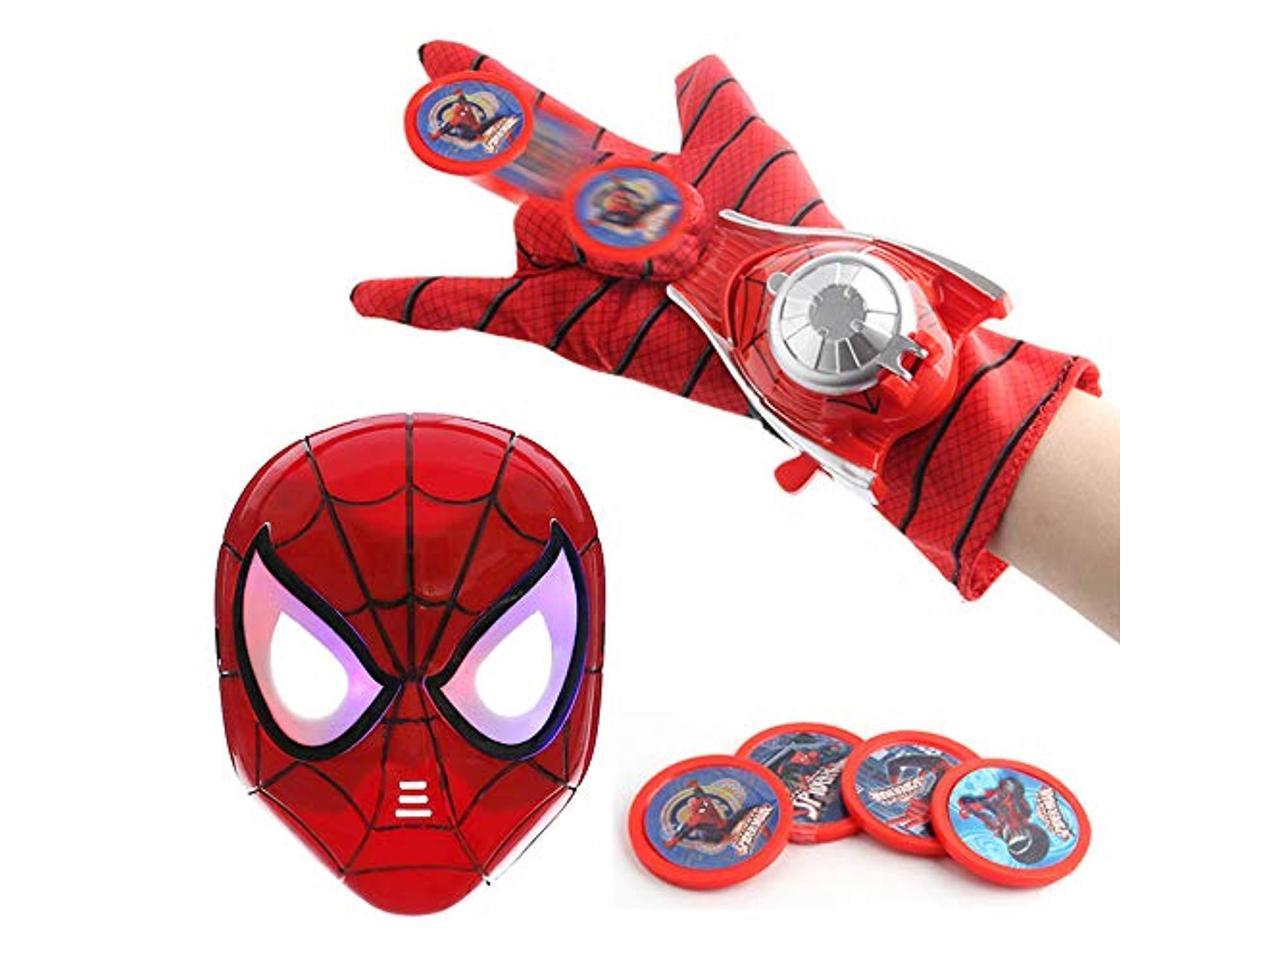 Avengers Spiderman LED Mask Light Up Cosplay Custome Accs Party Christmas Mask 